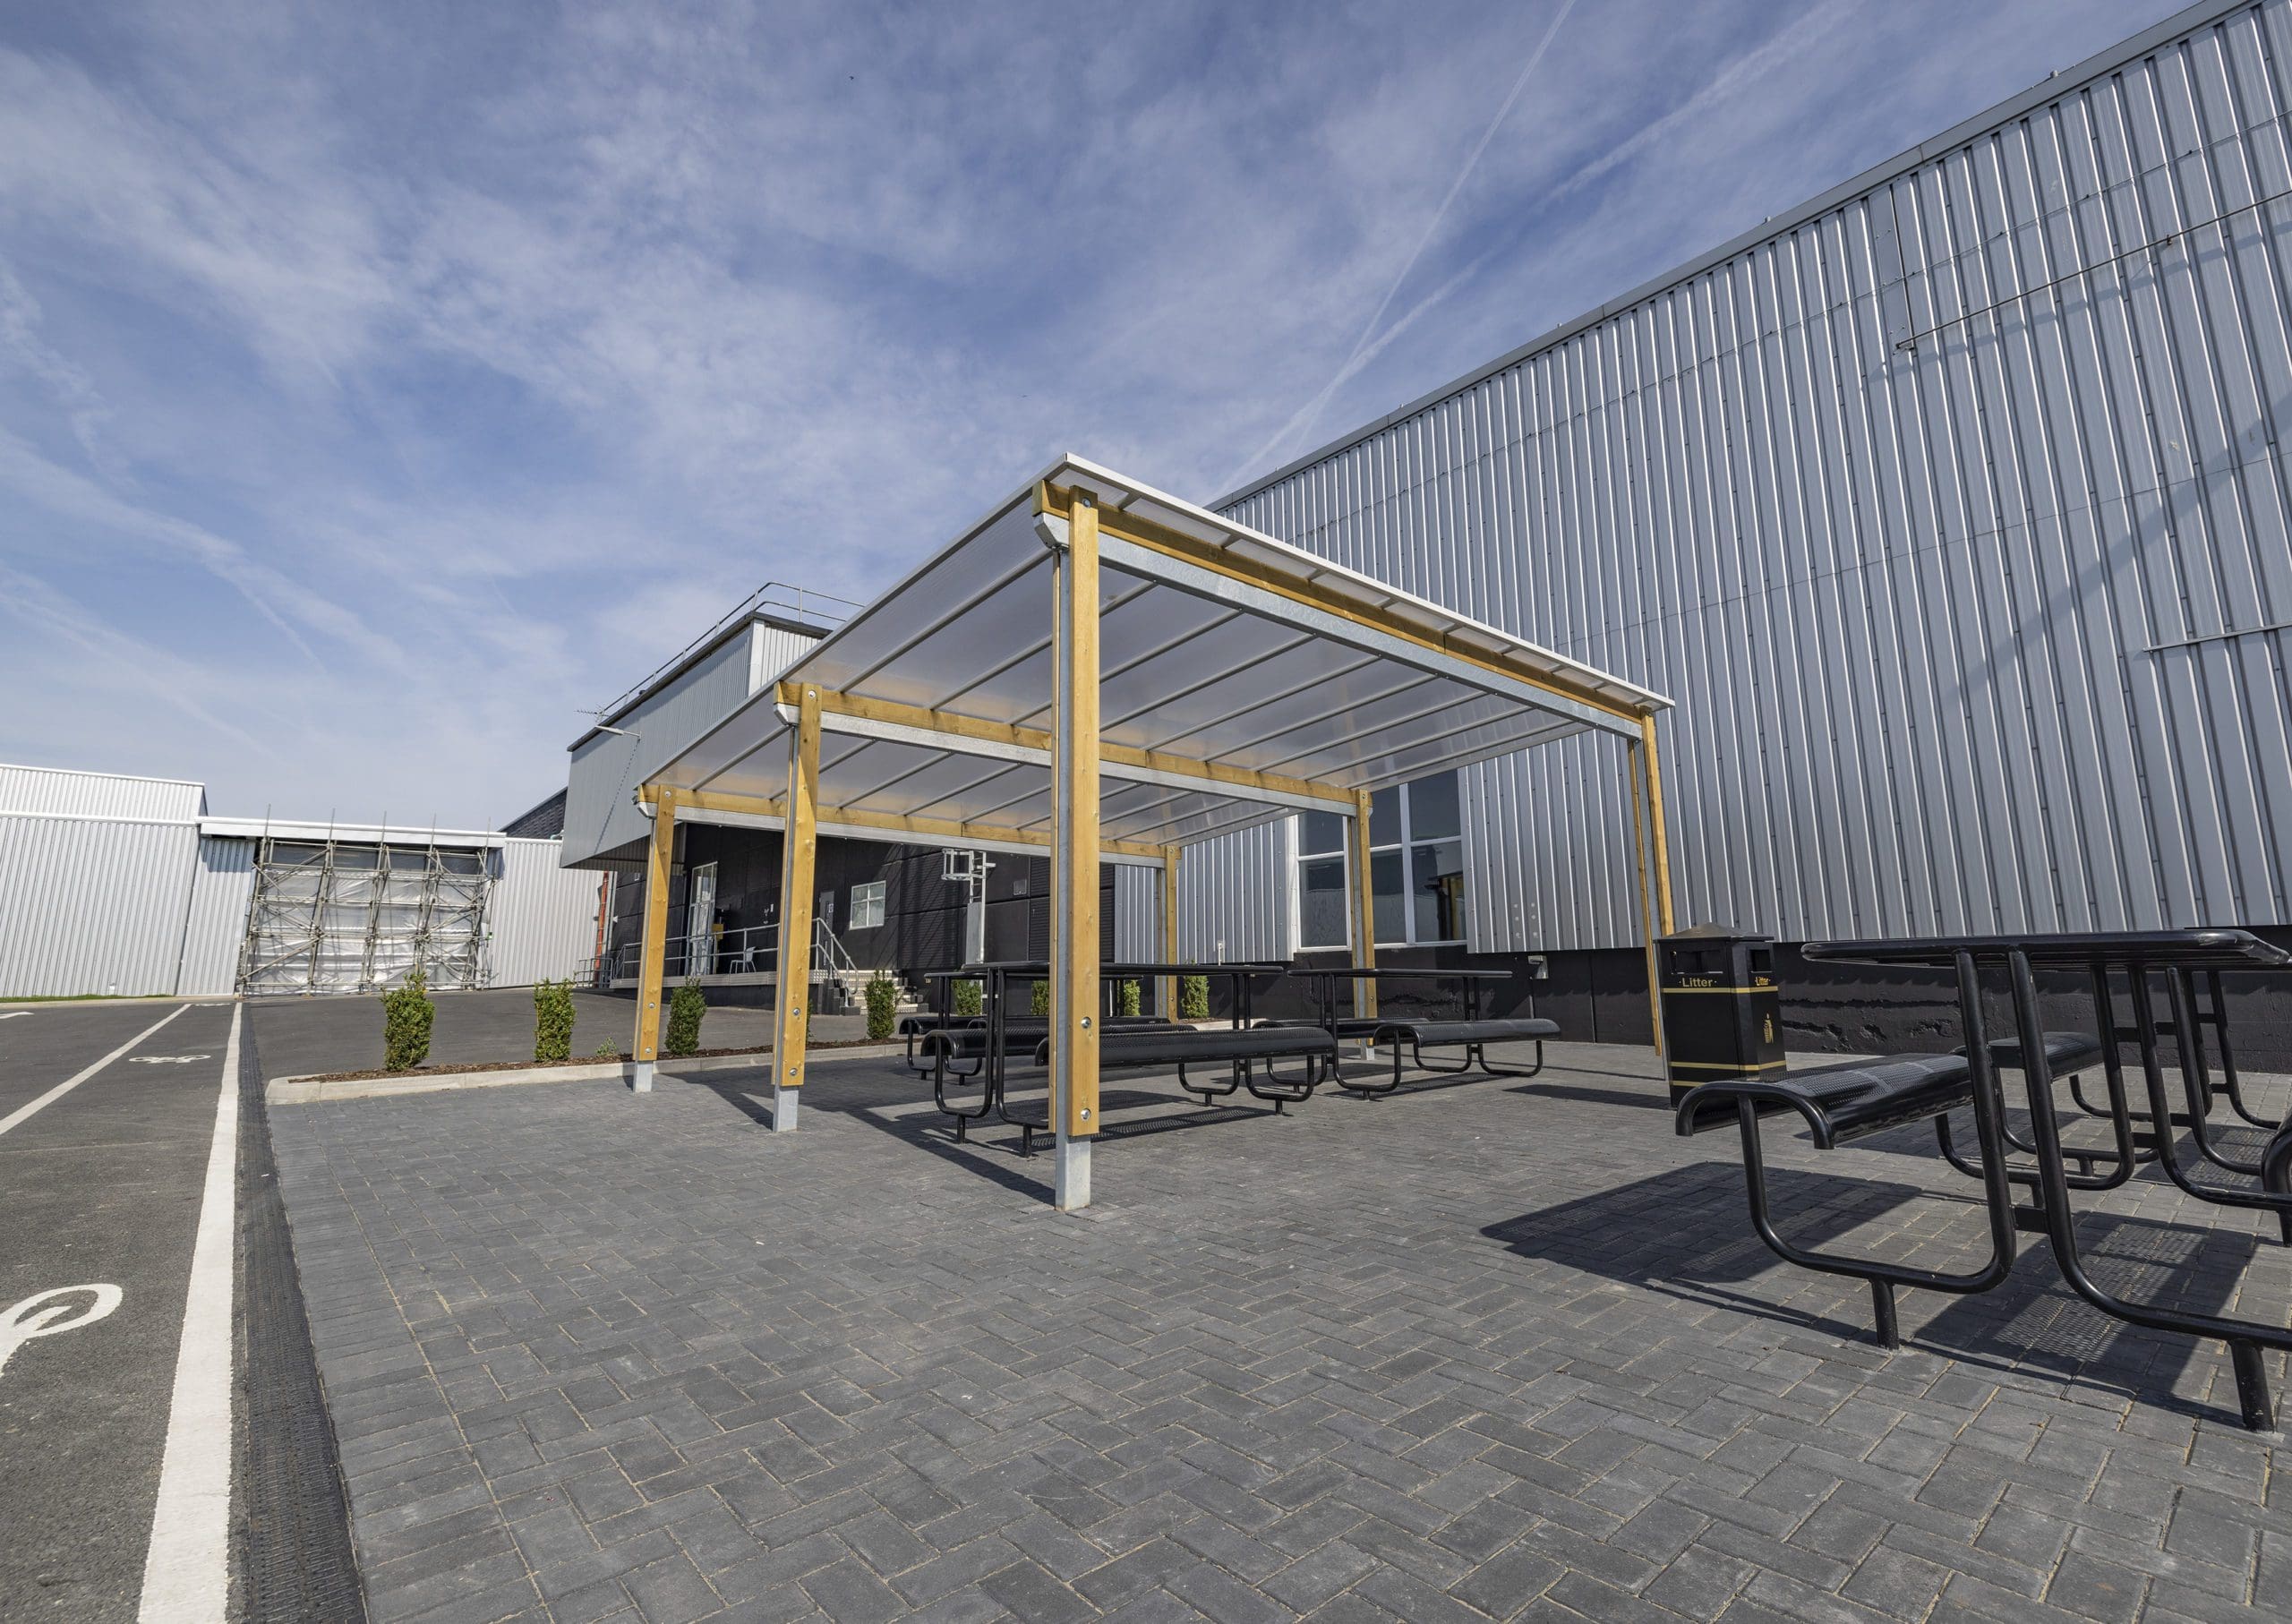 pergola-and-benches-outside-BMW-Swindon-commercial-building